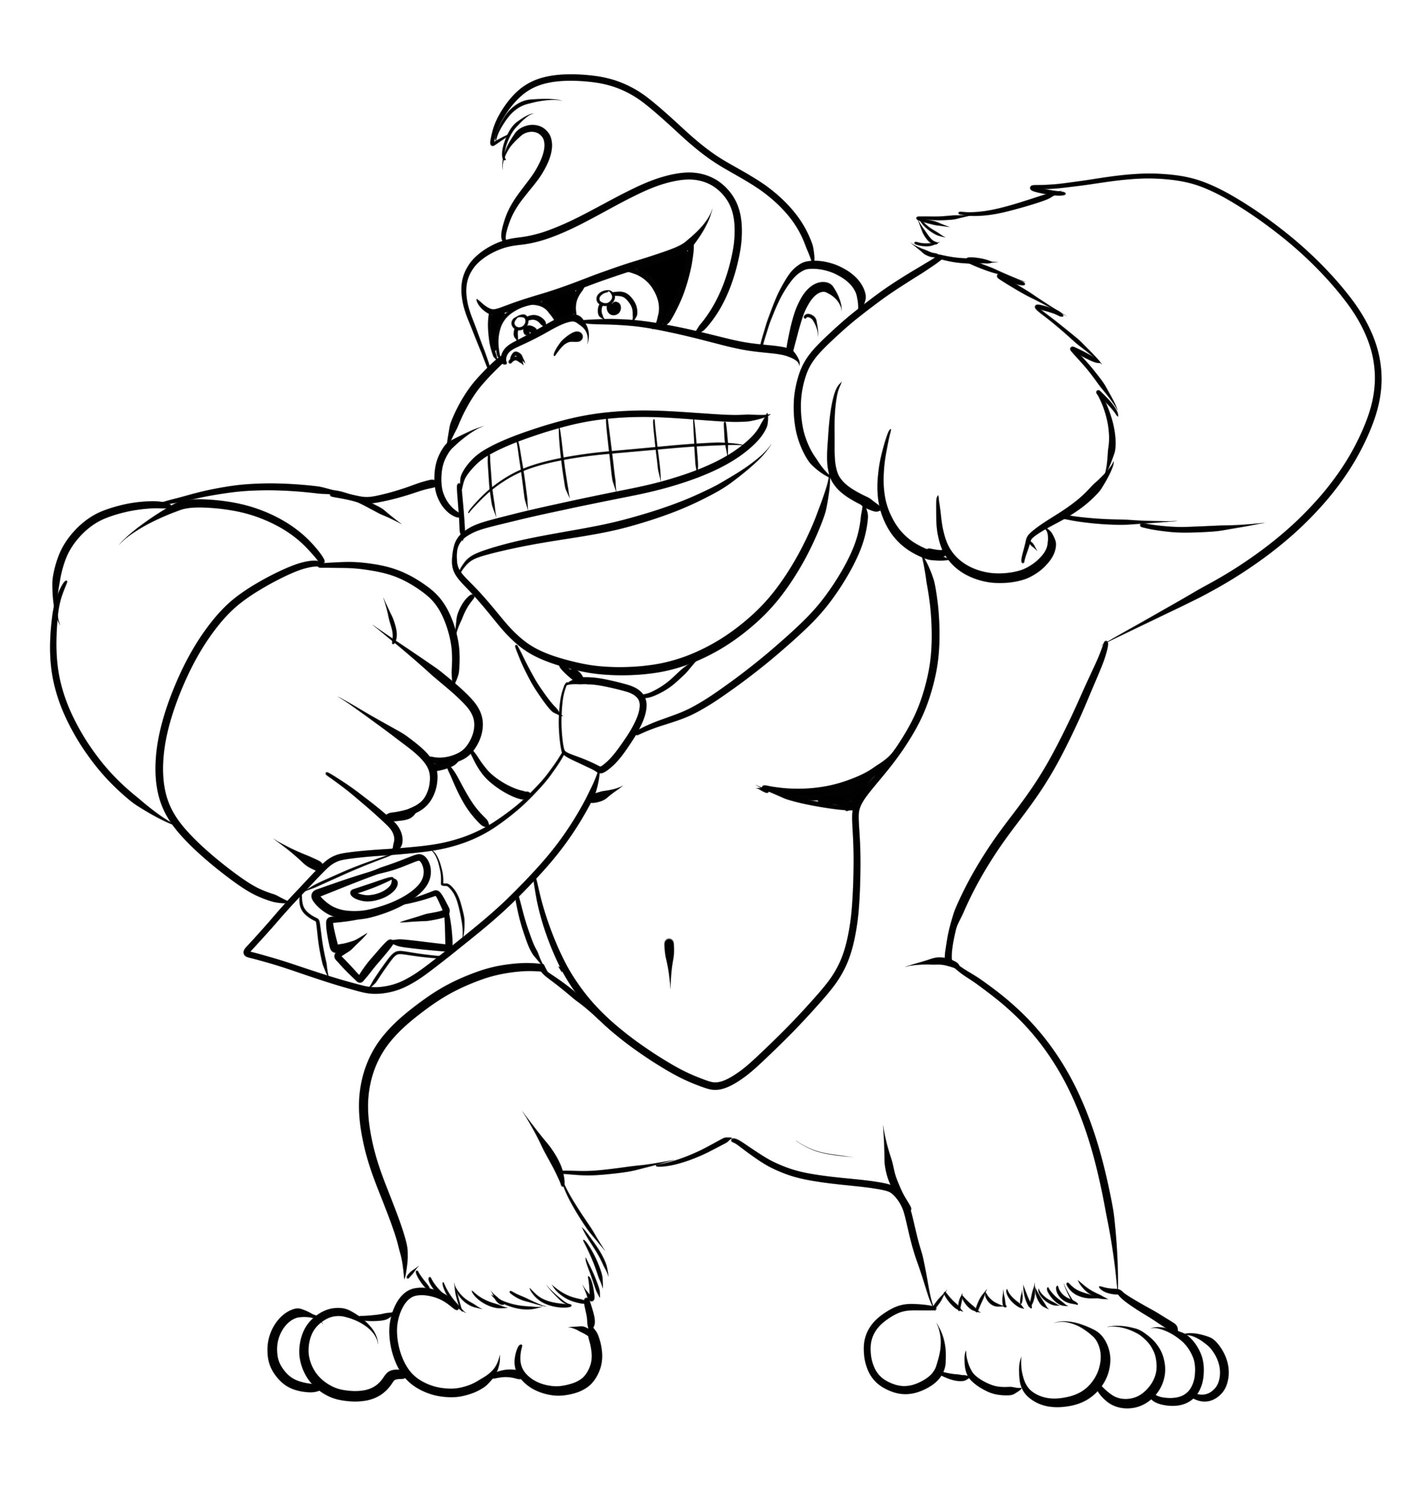 Donkey Kong 02  coloring page to print and coloring